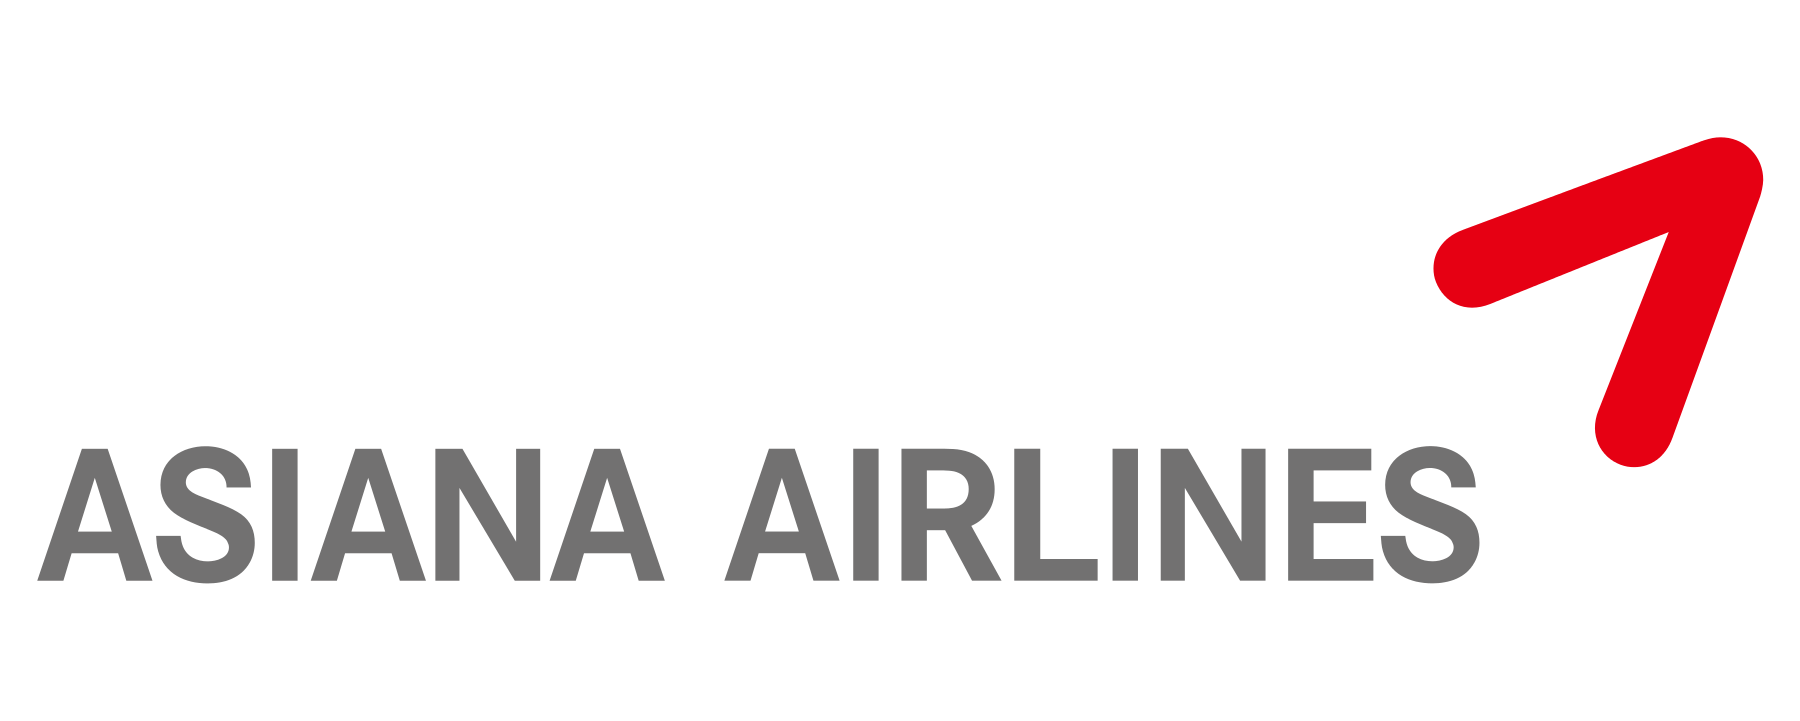 Asiana Airlines Brand Logo